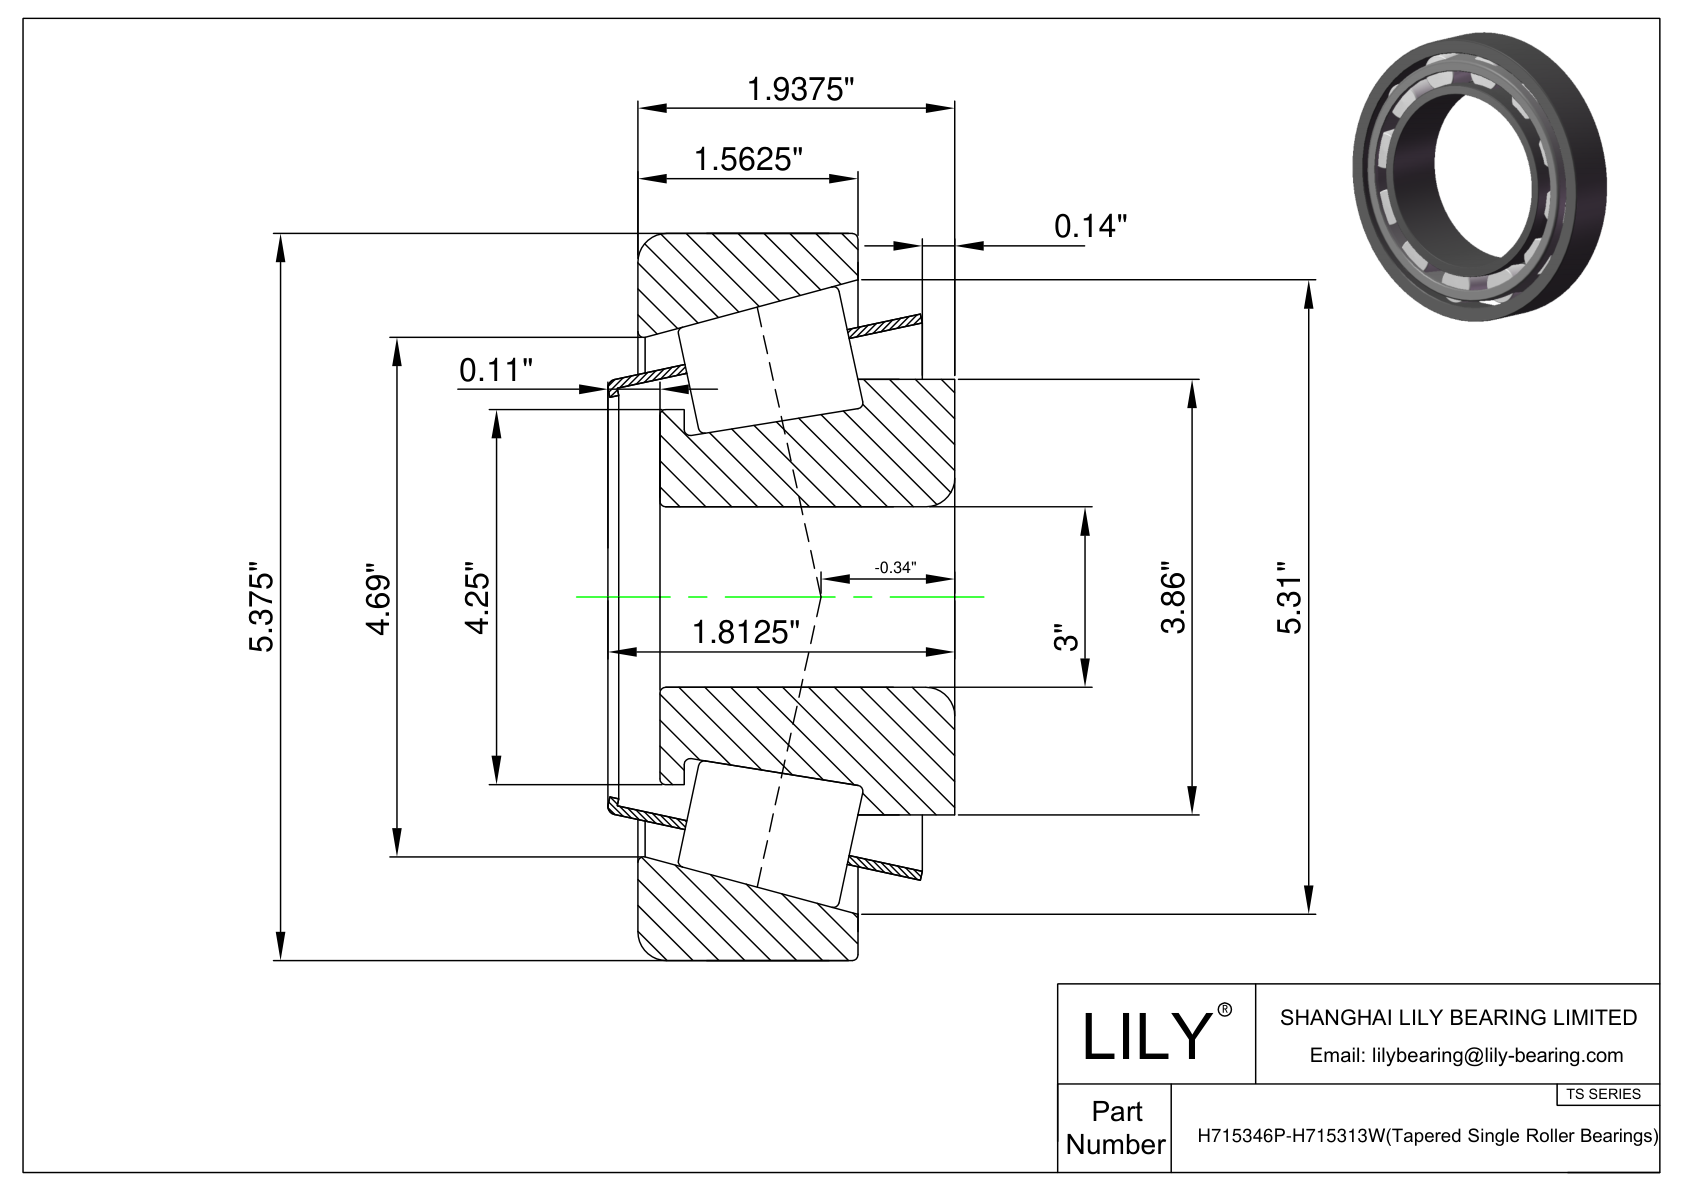 H715346P-H715313W TS (Tapered Single Roller Bearings) (Imperial) cad drawing